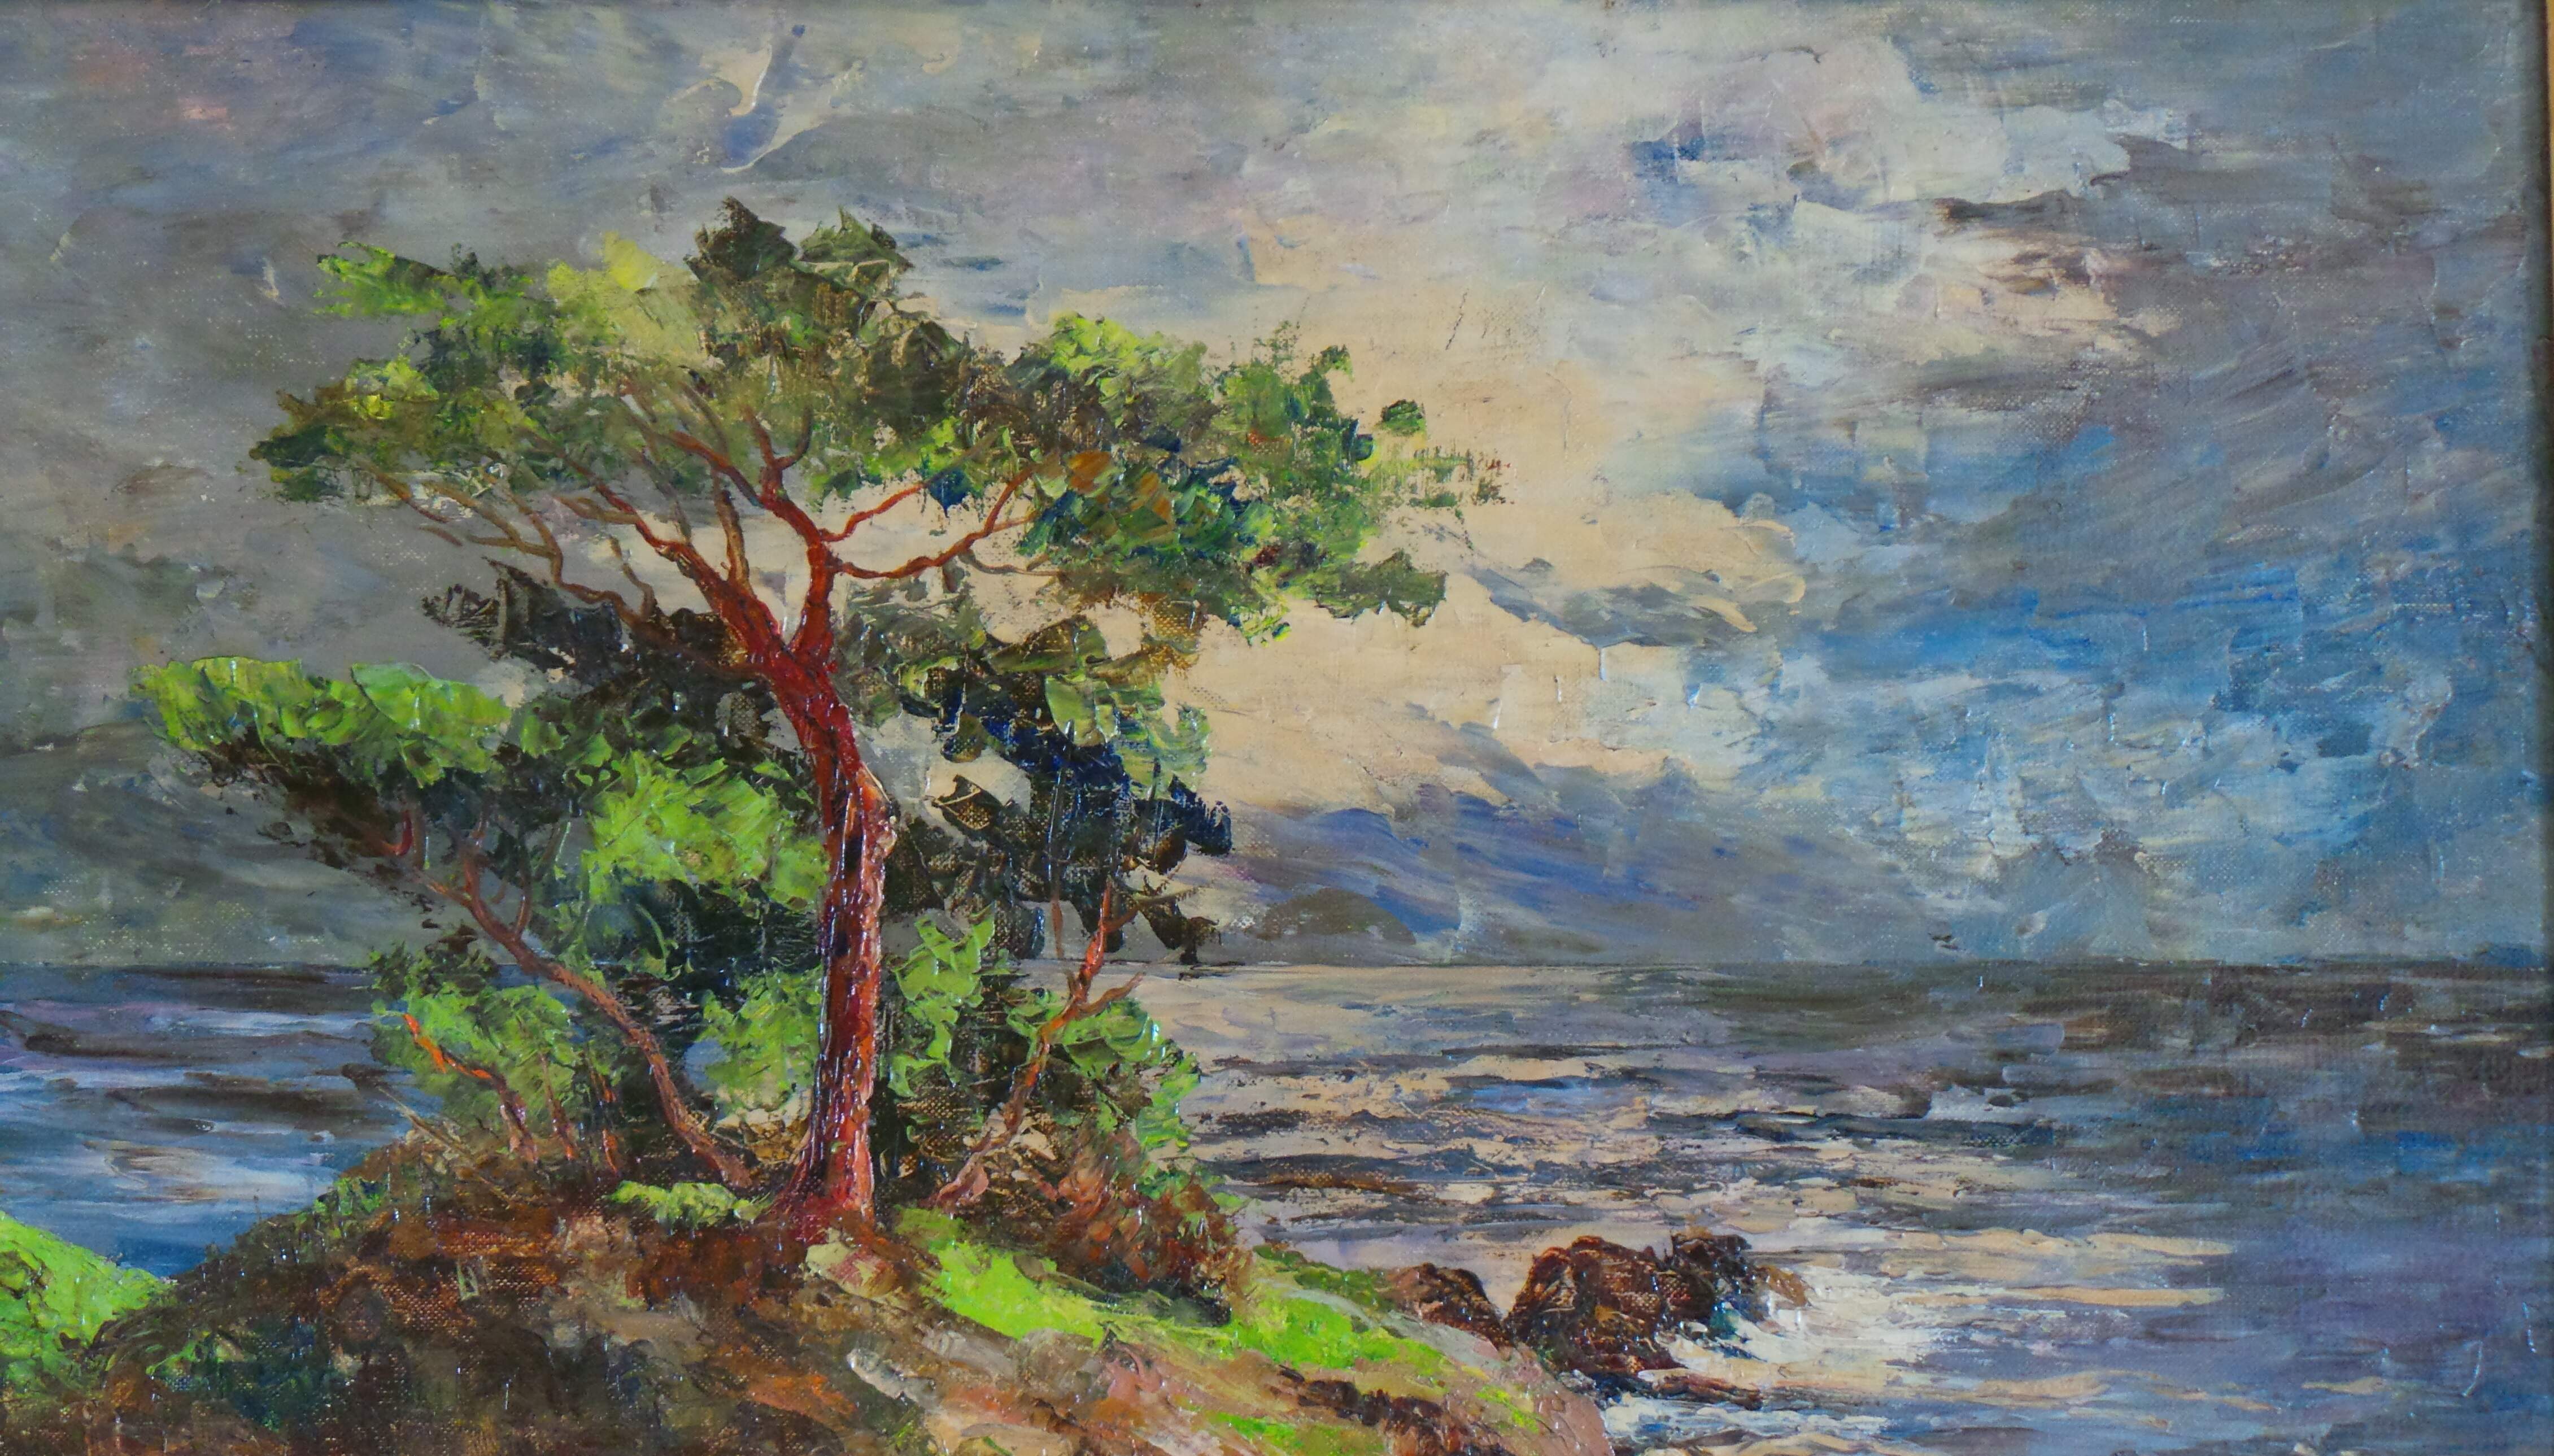 SEASIDE IMPRESSION AT A SUNSET. AN OIL PAINTING ON BOARD. (1964)